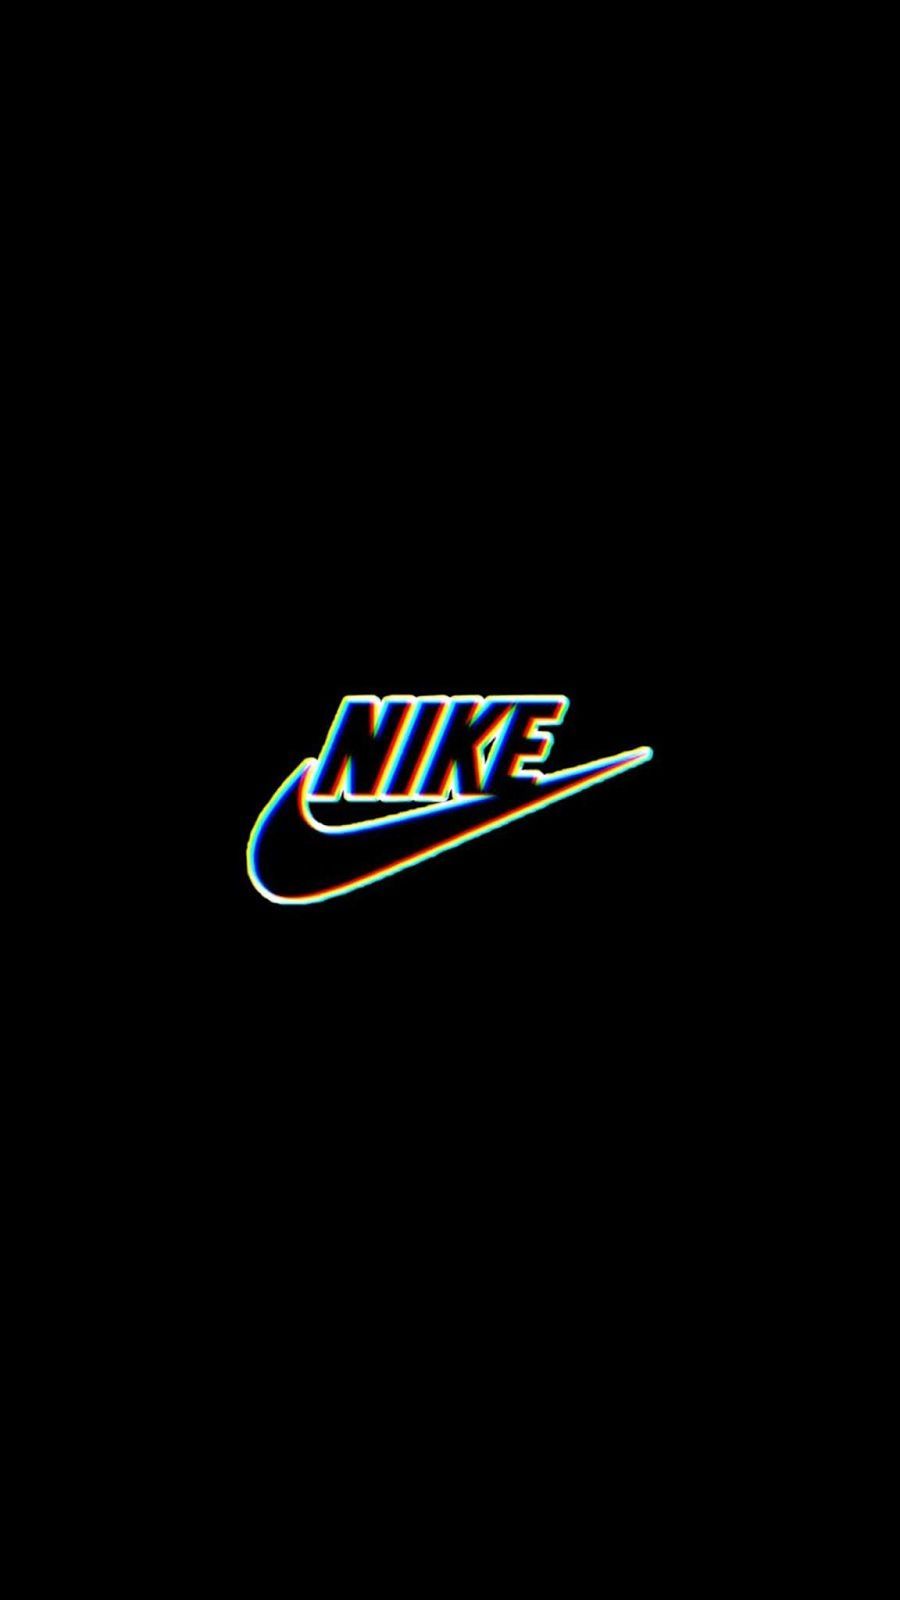 Nike Logo HD Wallpapers For Iphone X, Iphone XR,Iphone 11, Etc